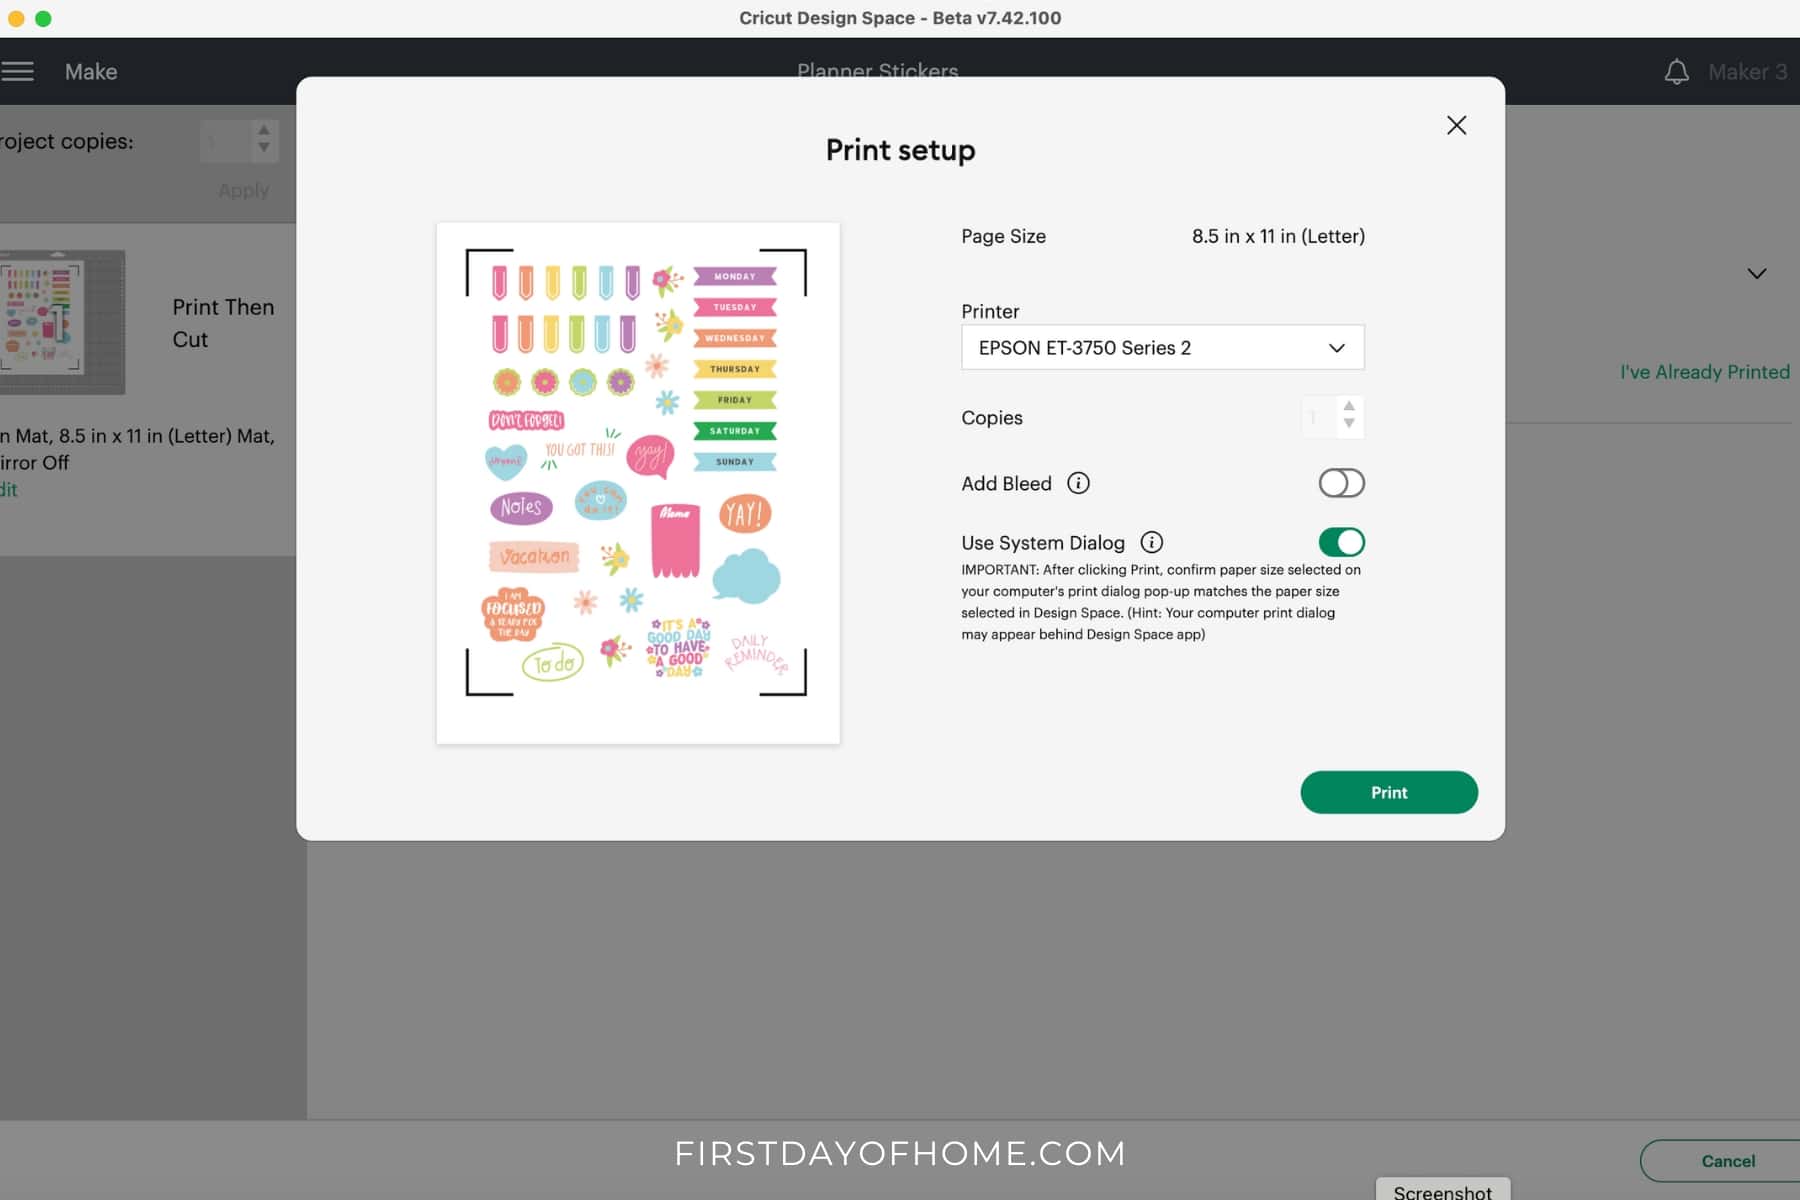 Print settings for making stickers with Cricut